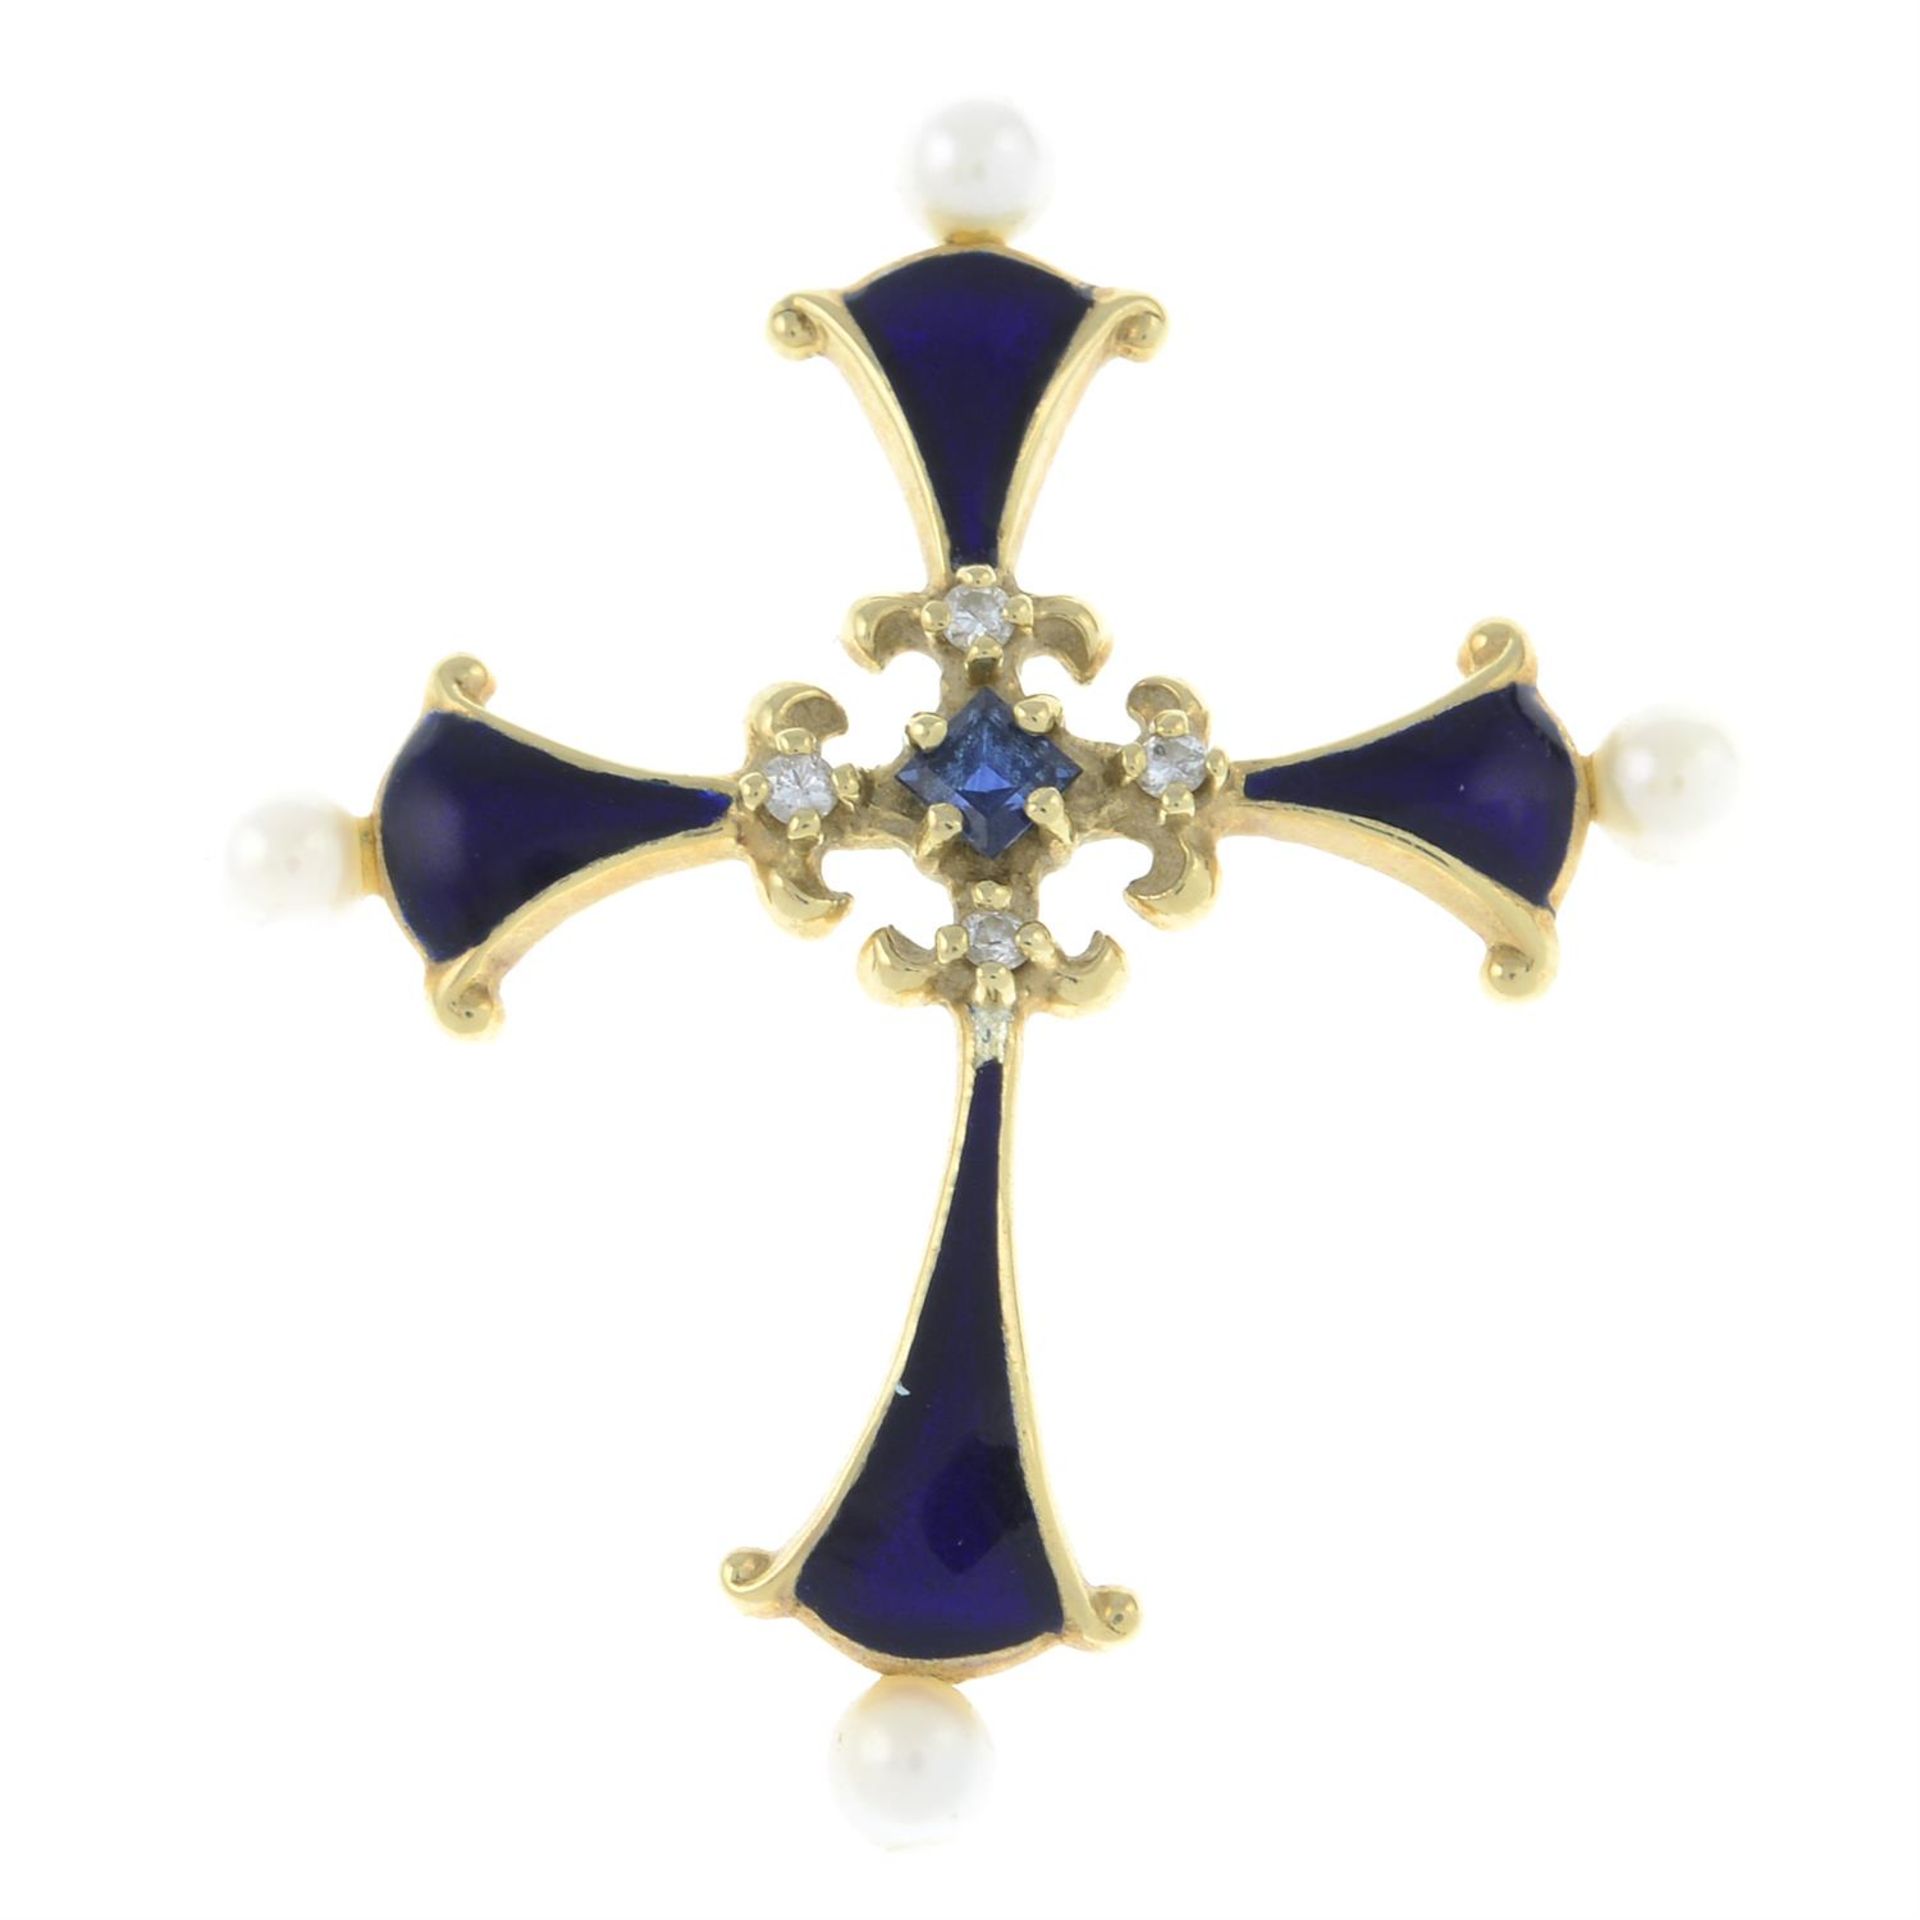 A 14ct gold diamond, sapphire, seed pearl and enamel cross pendant.